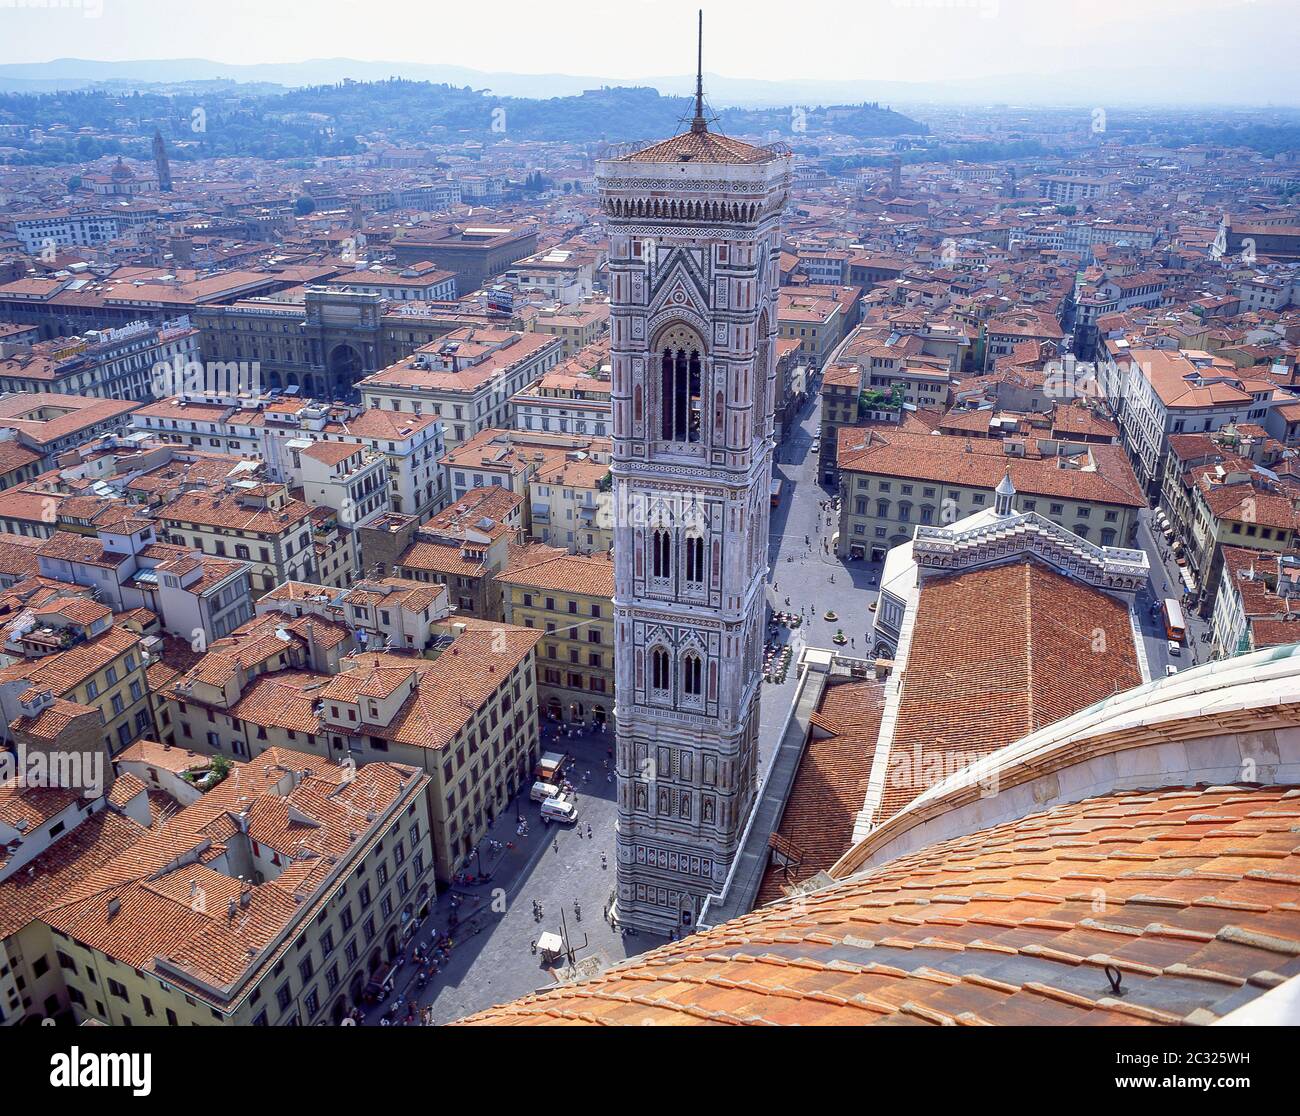 Panoramic view of Old Town from Cattedrale di Santa Maria del Fiore (Duomo), Florence (Firenze), Tuscany Region, Italy Stock Photo